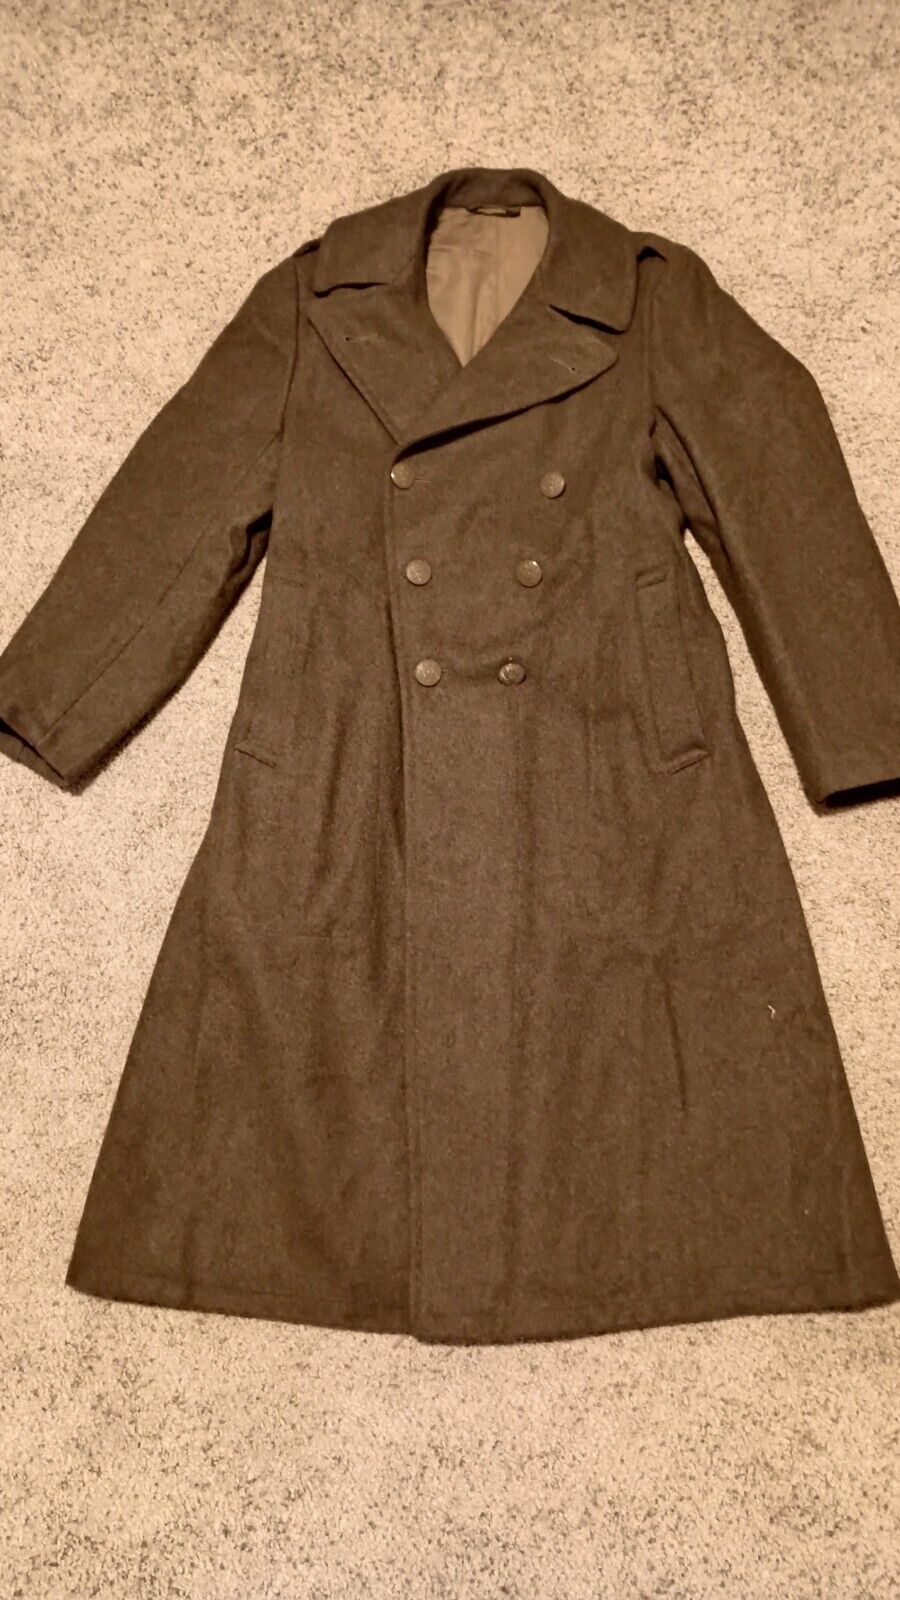 WW2 WWII 1945 Vintage US Army Trench Coat Overcoat, Melton Wool, 38R VERY NICE